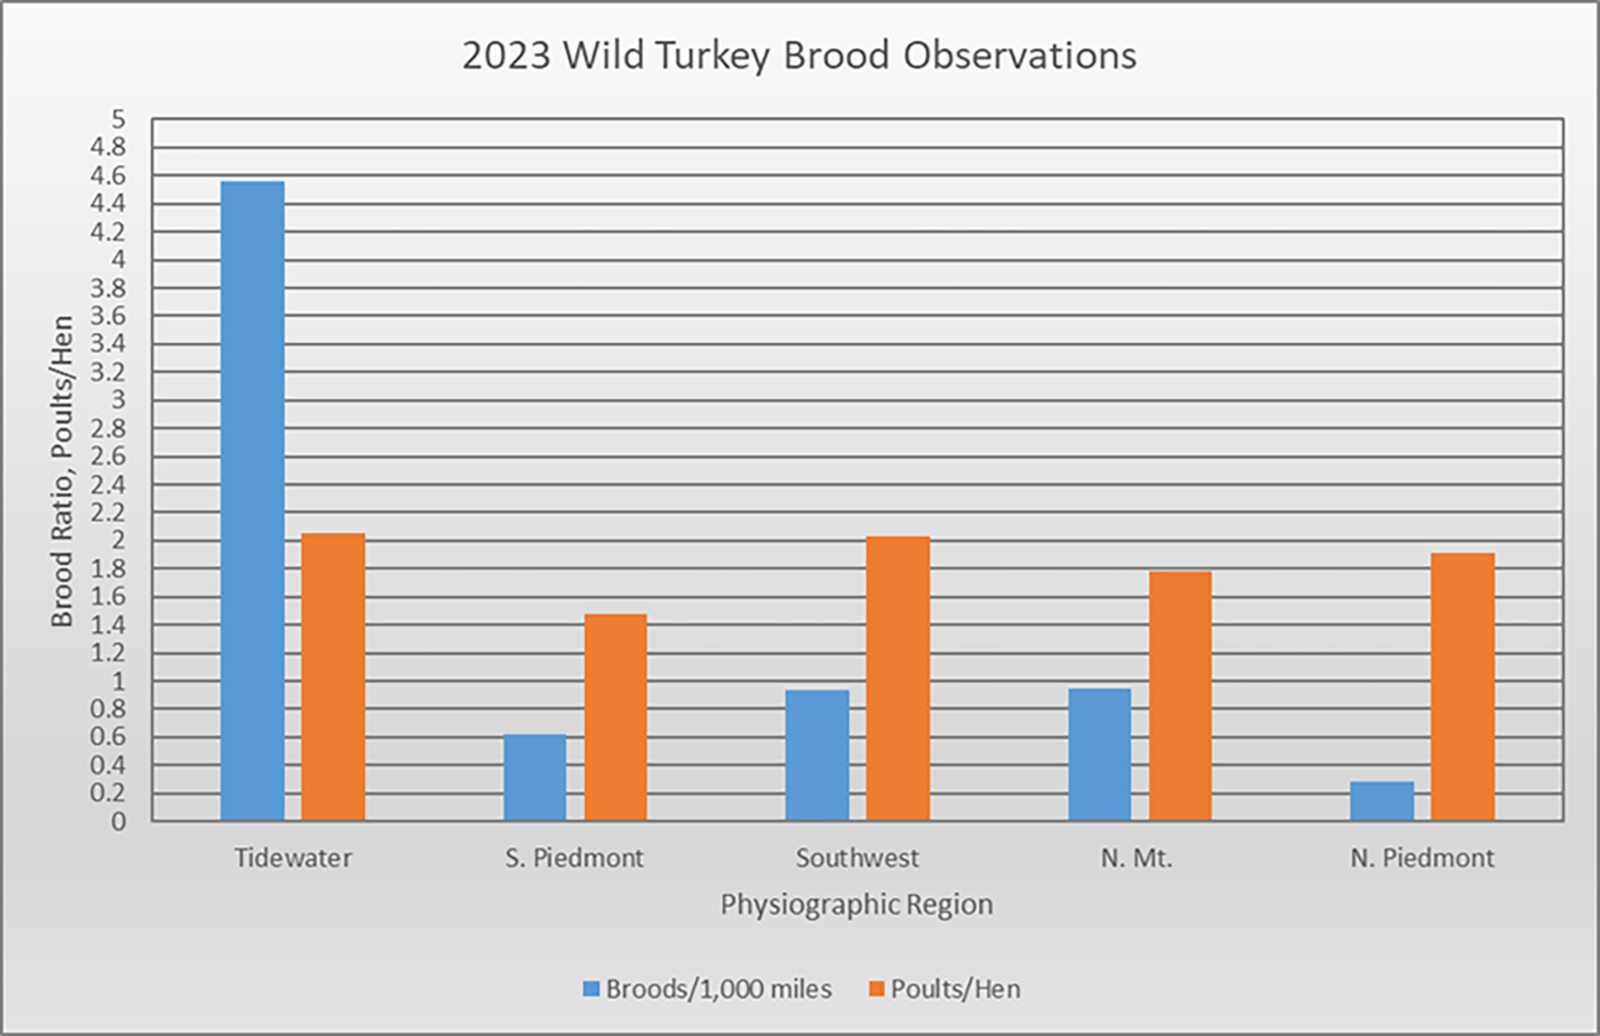 A chart showing the wild turkey brood observations by region in 2023.